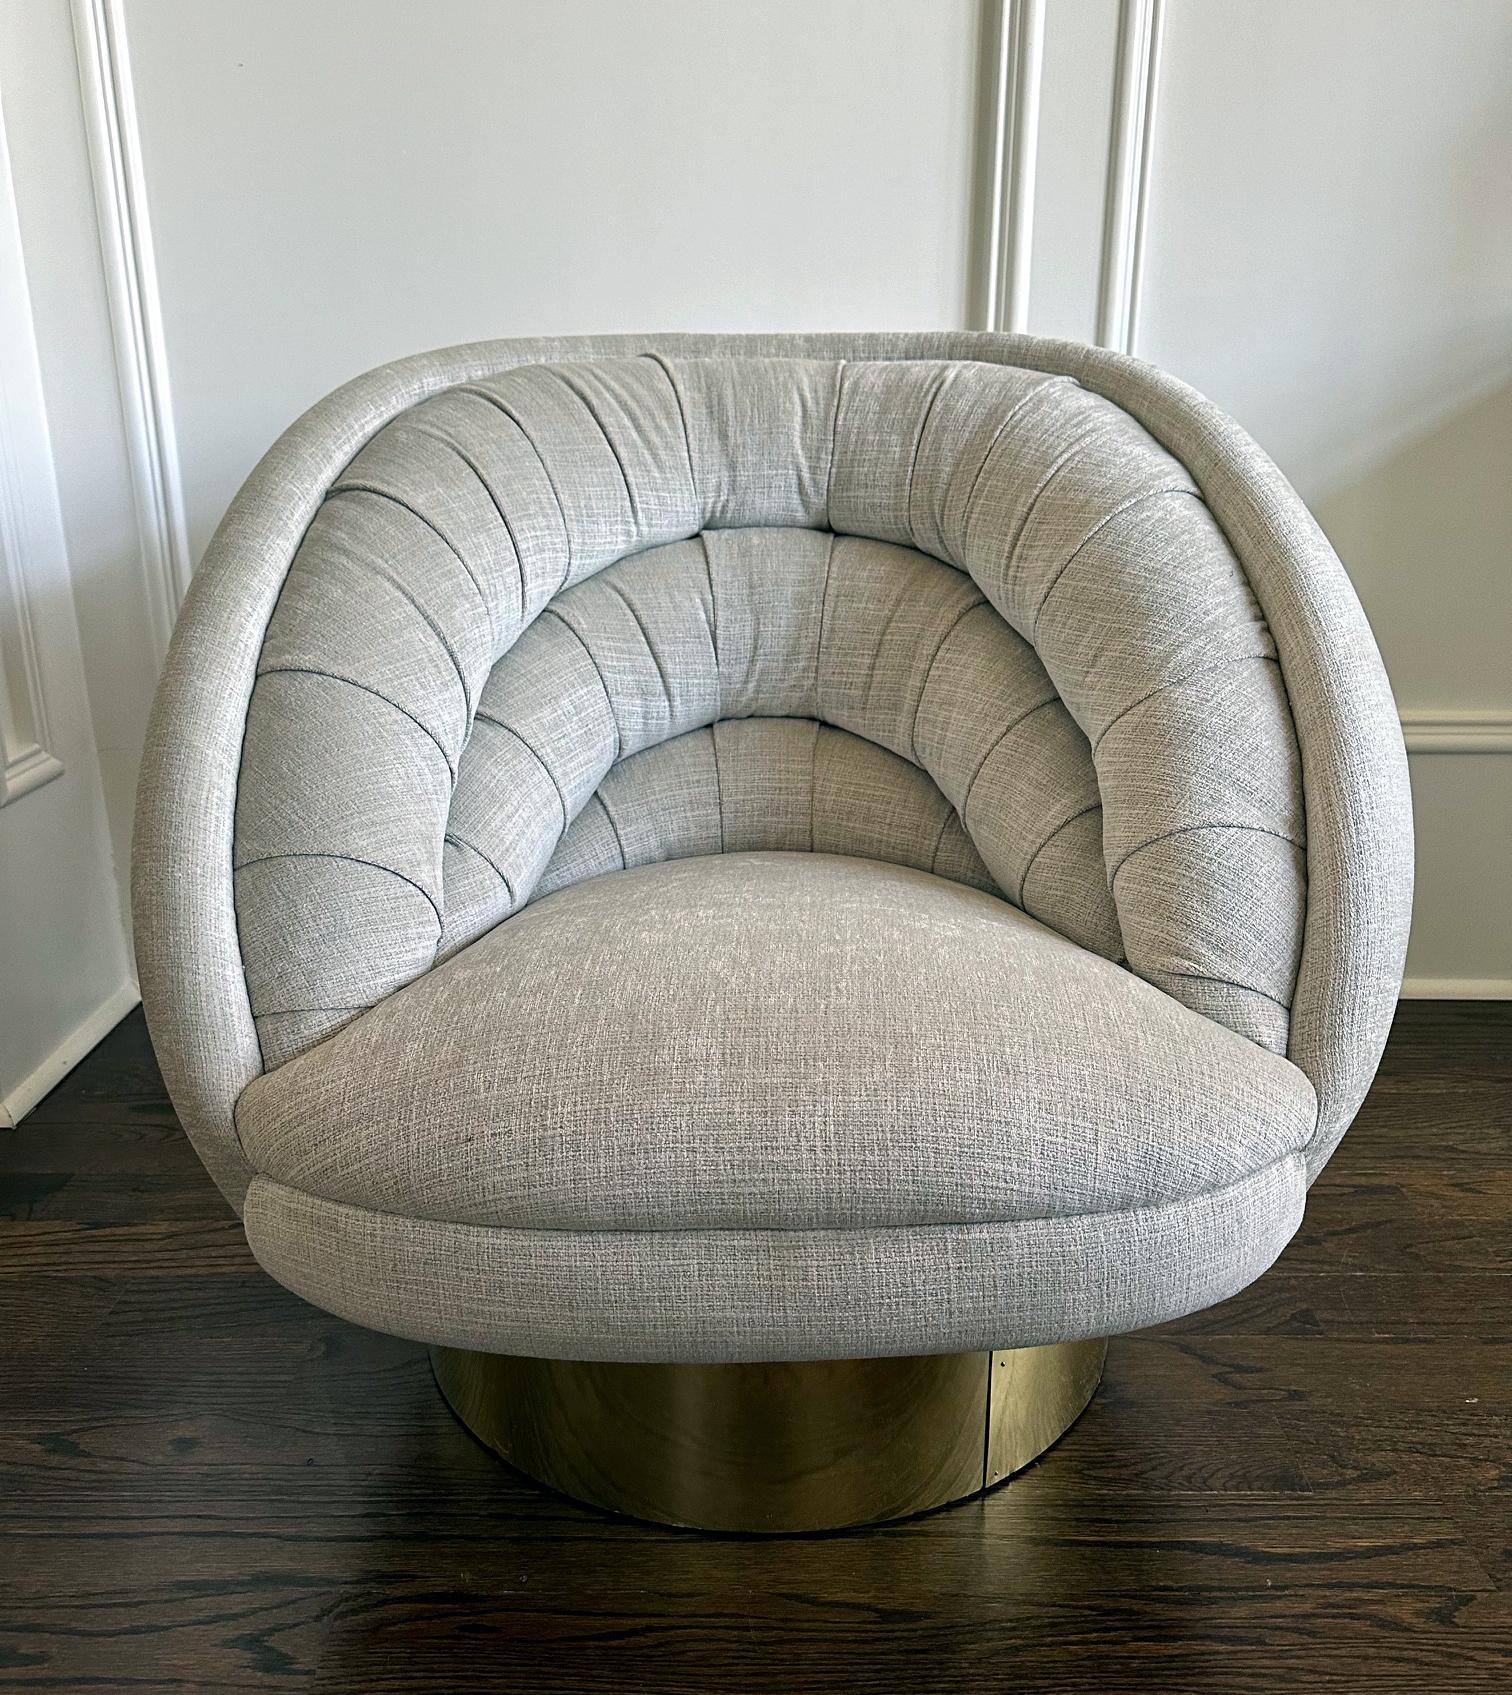 A glamorous swivel lounge chair designed and manufactured by Vladimir Kagan (1927-2016) circa 1970-80s. Known as Ellipse or Crescent chair, the model was designed by Vladimir Kagan in 1976. The chair on offer features a brass clad base and a heavy